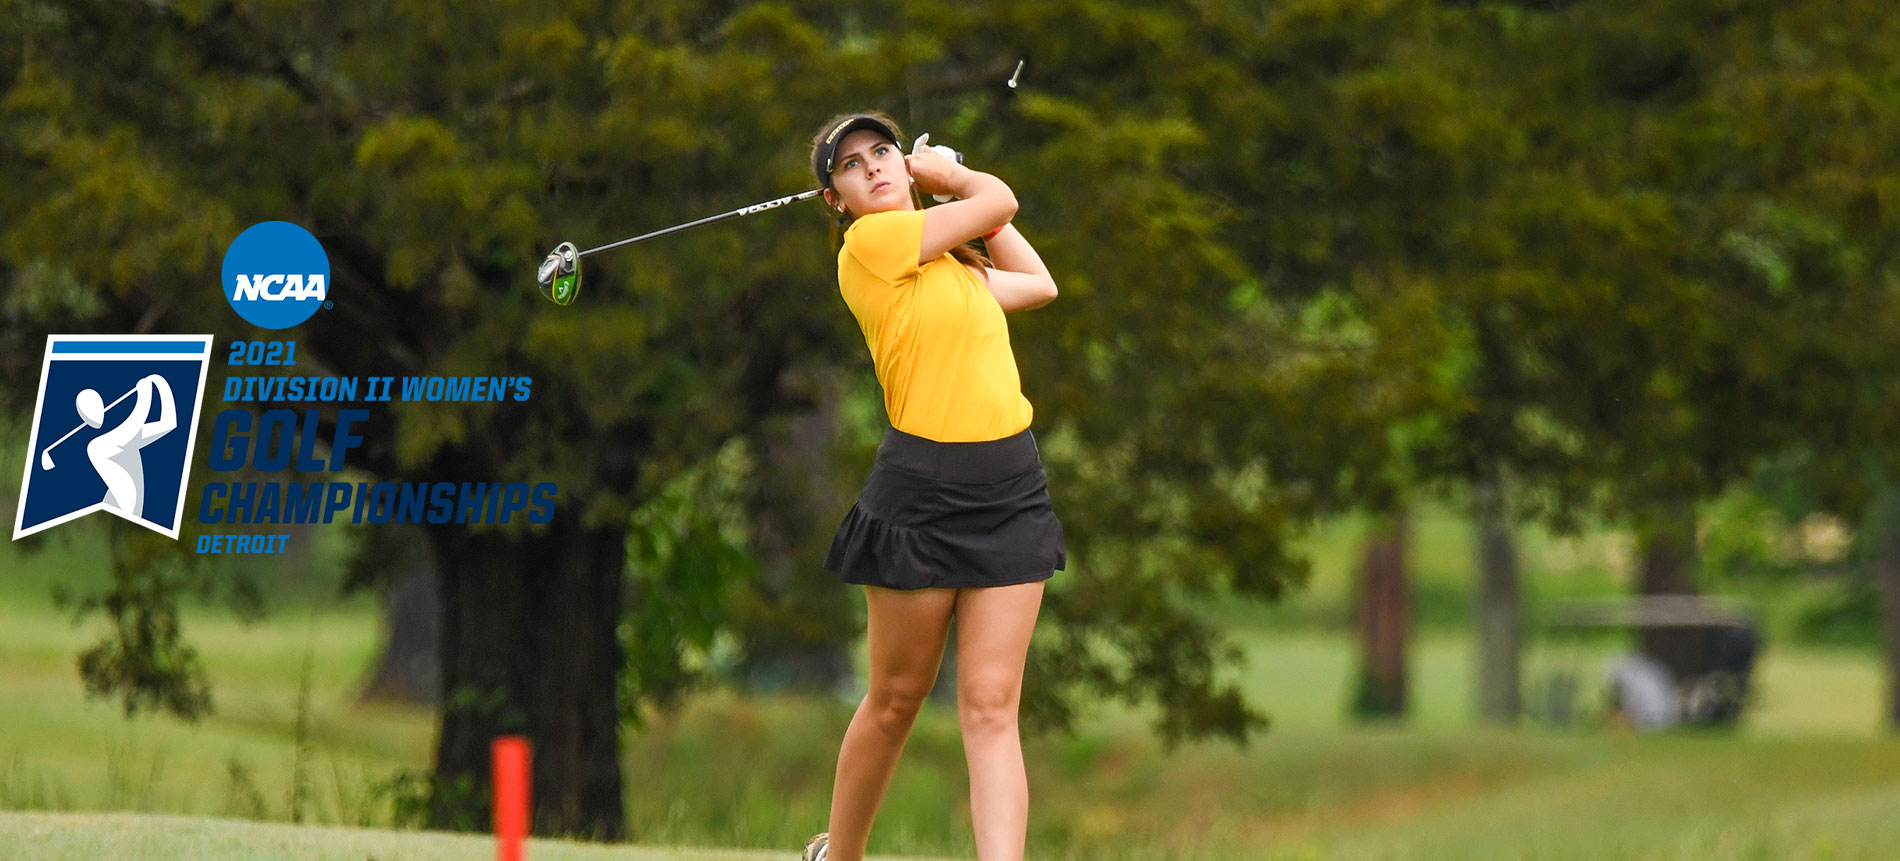 Charles Tied for 39th Place Following Opening Round of NCAA Women’s Golf Championships